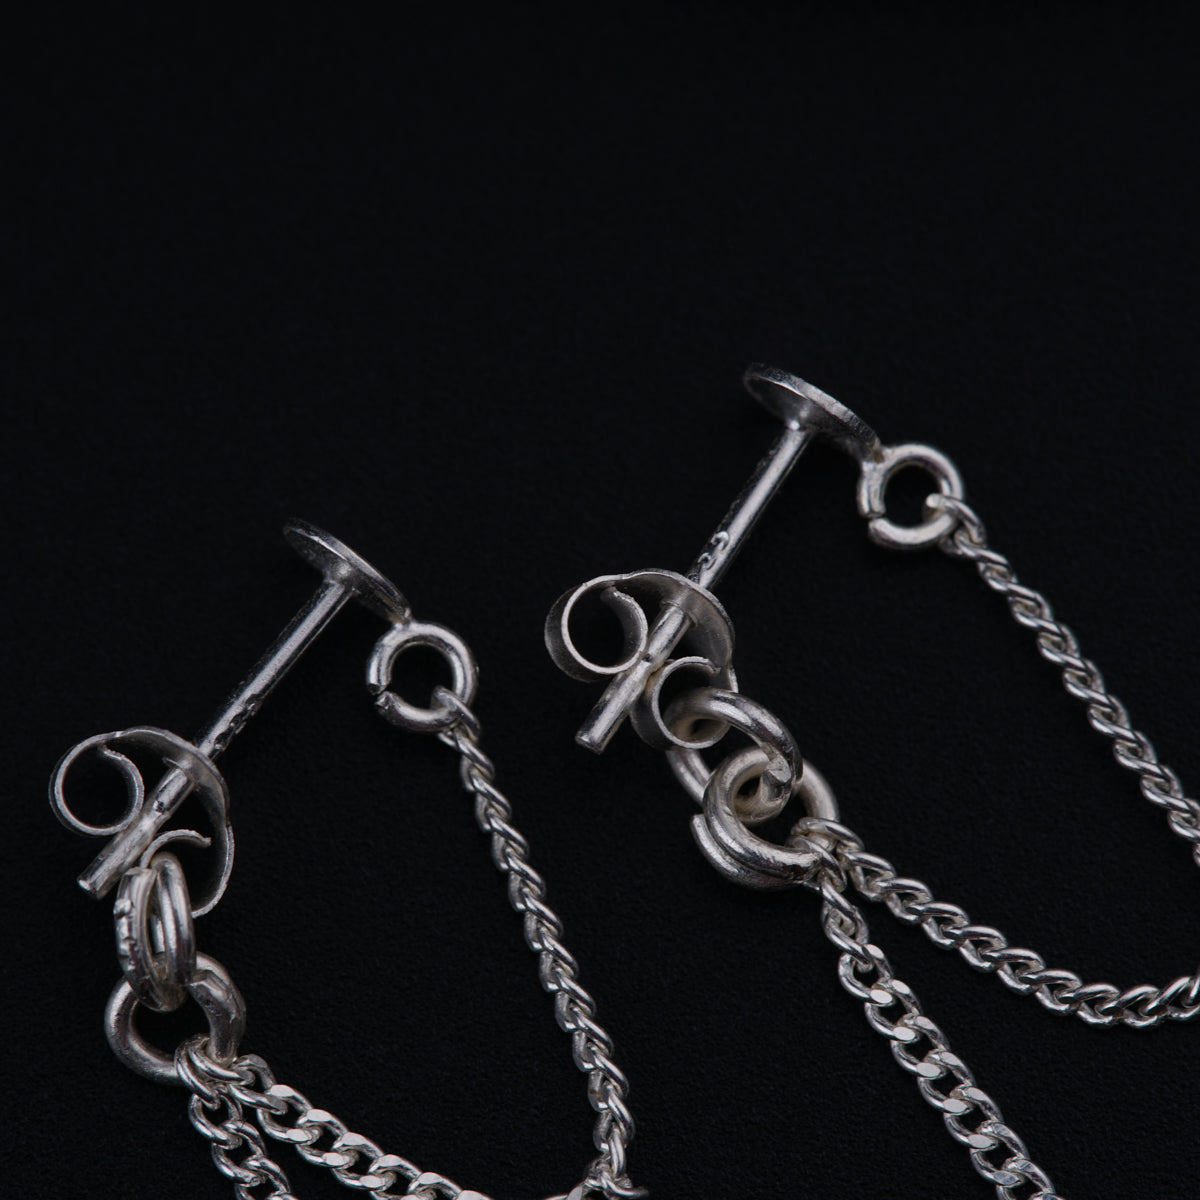 a pair of silver earrings with chains on a black background